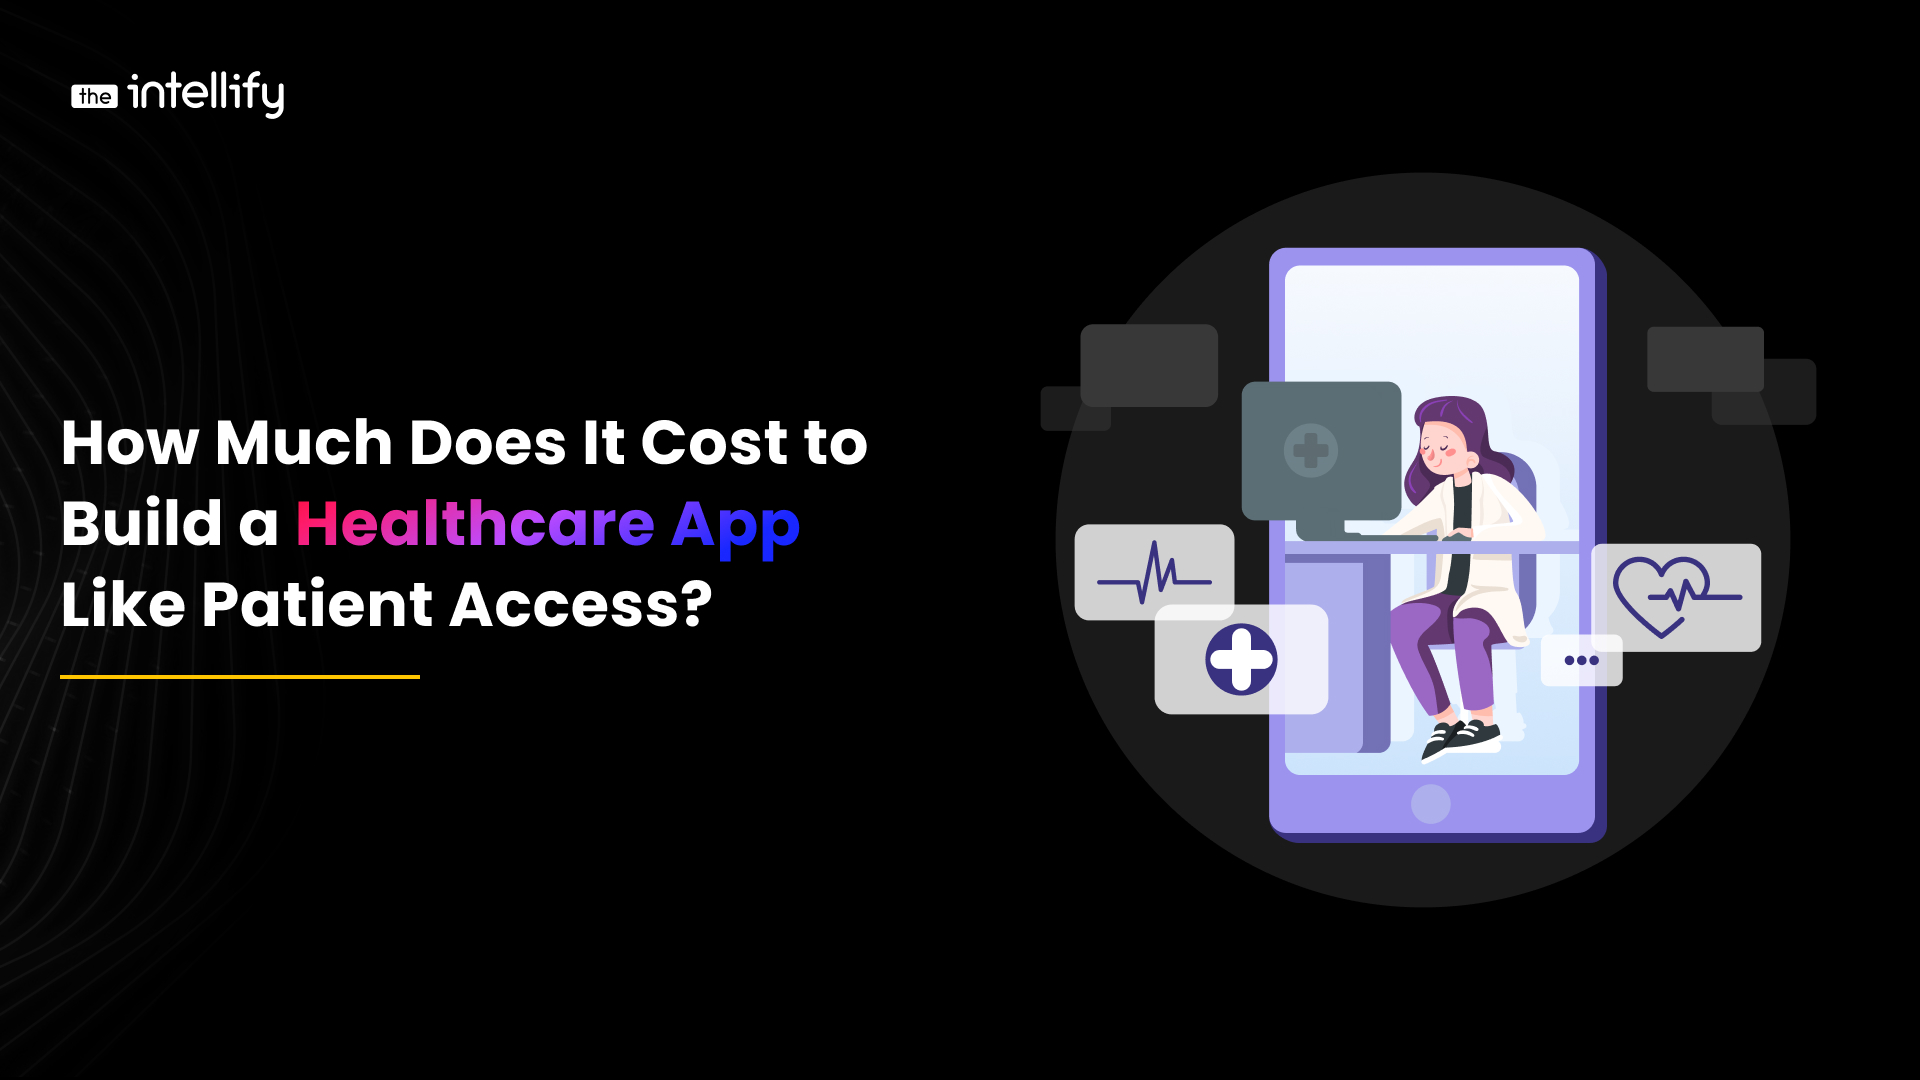 How Much Does It Cost to Build a Healthcare App Like Patient Access?